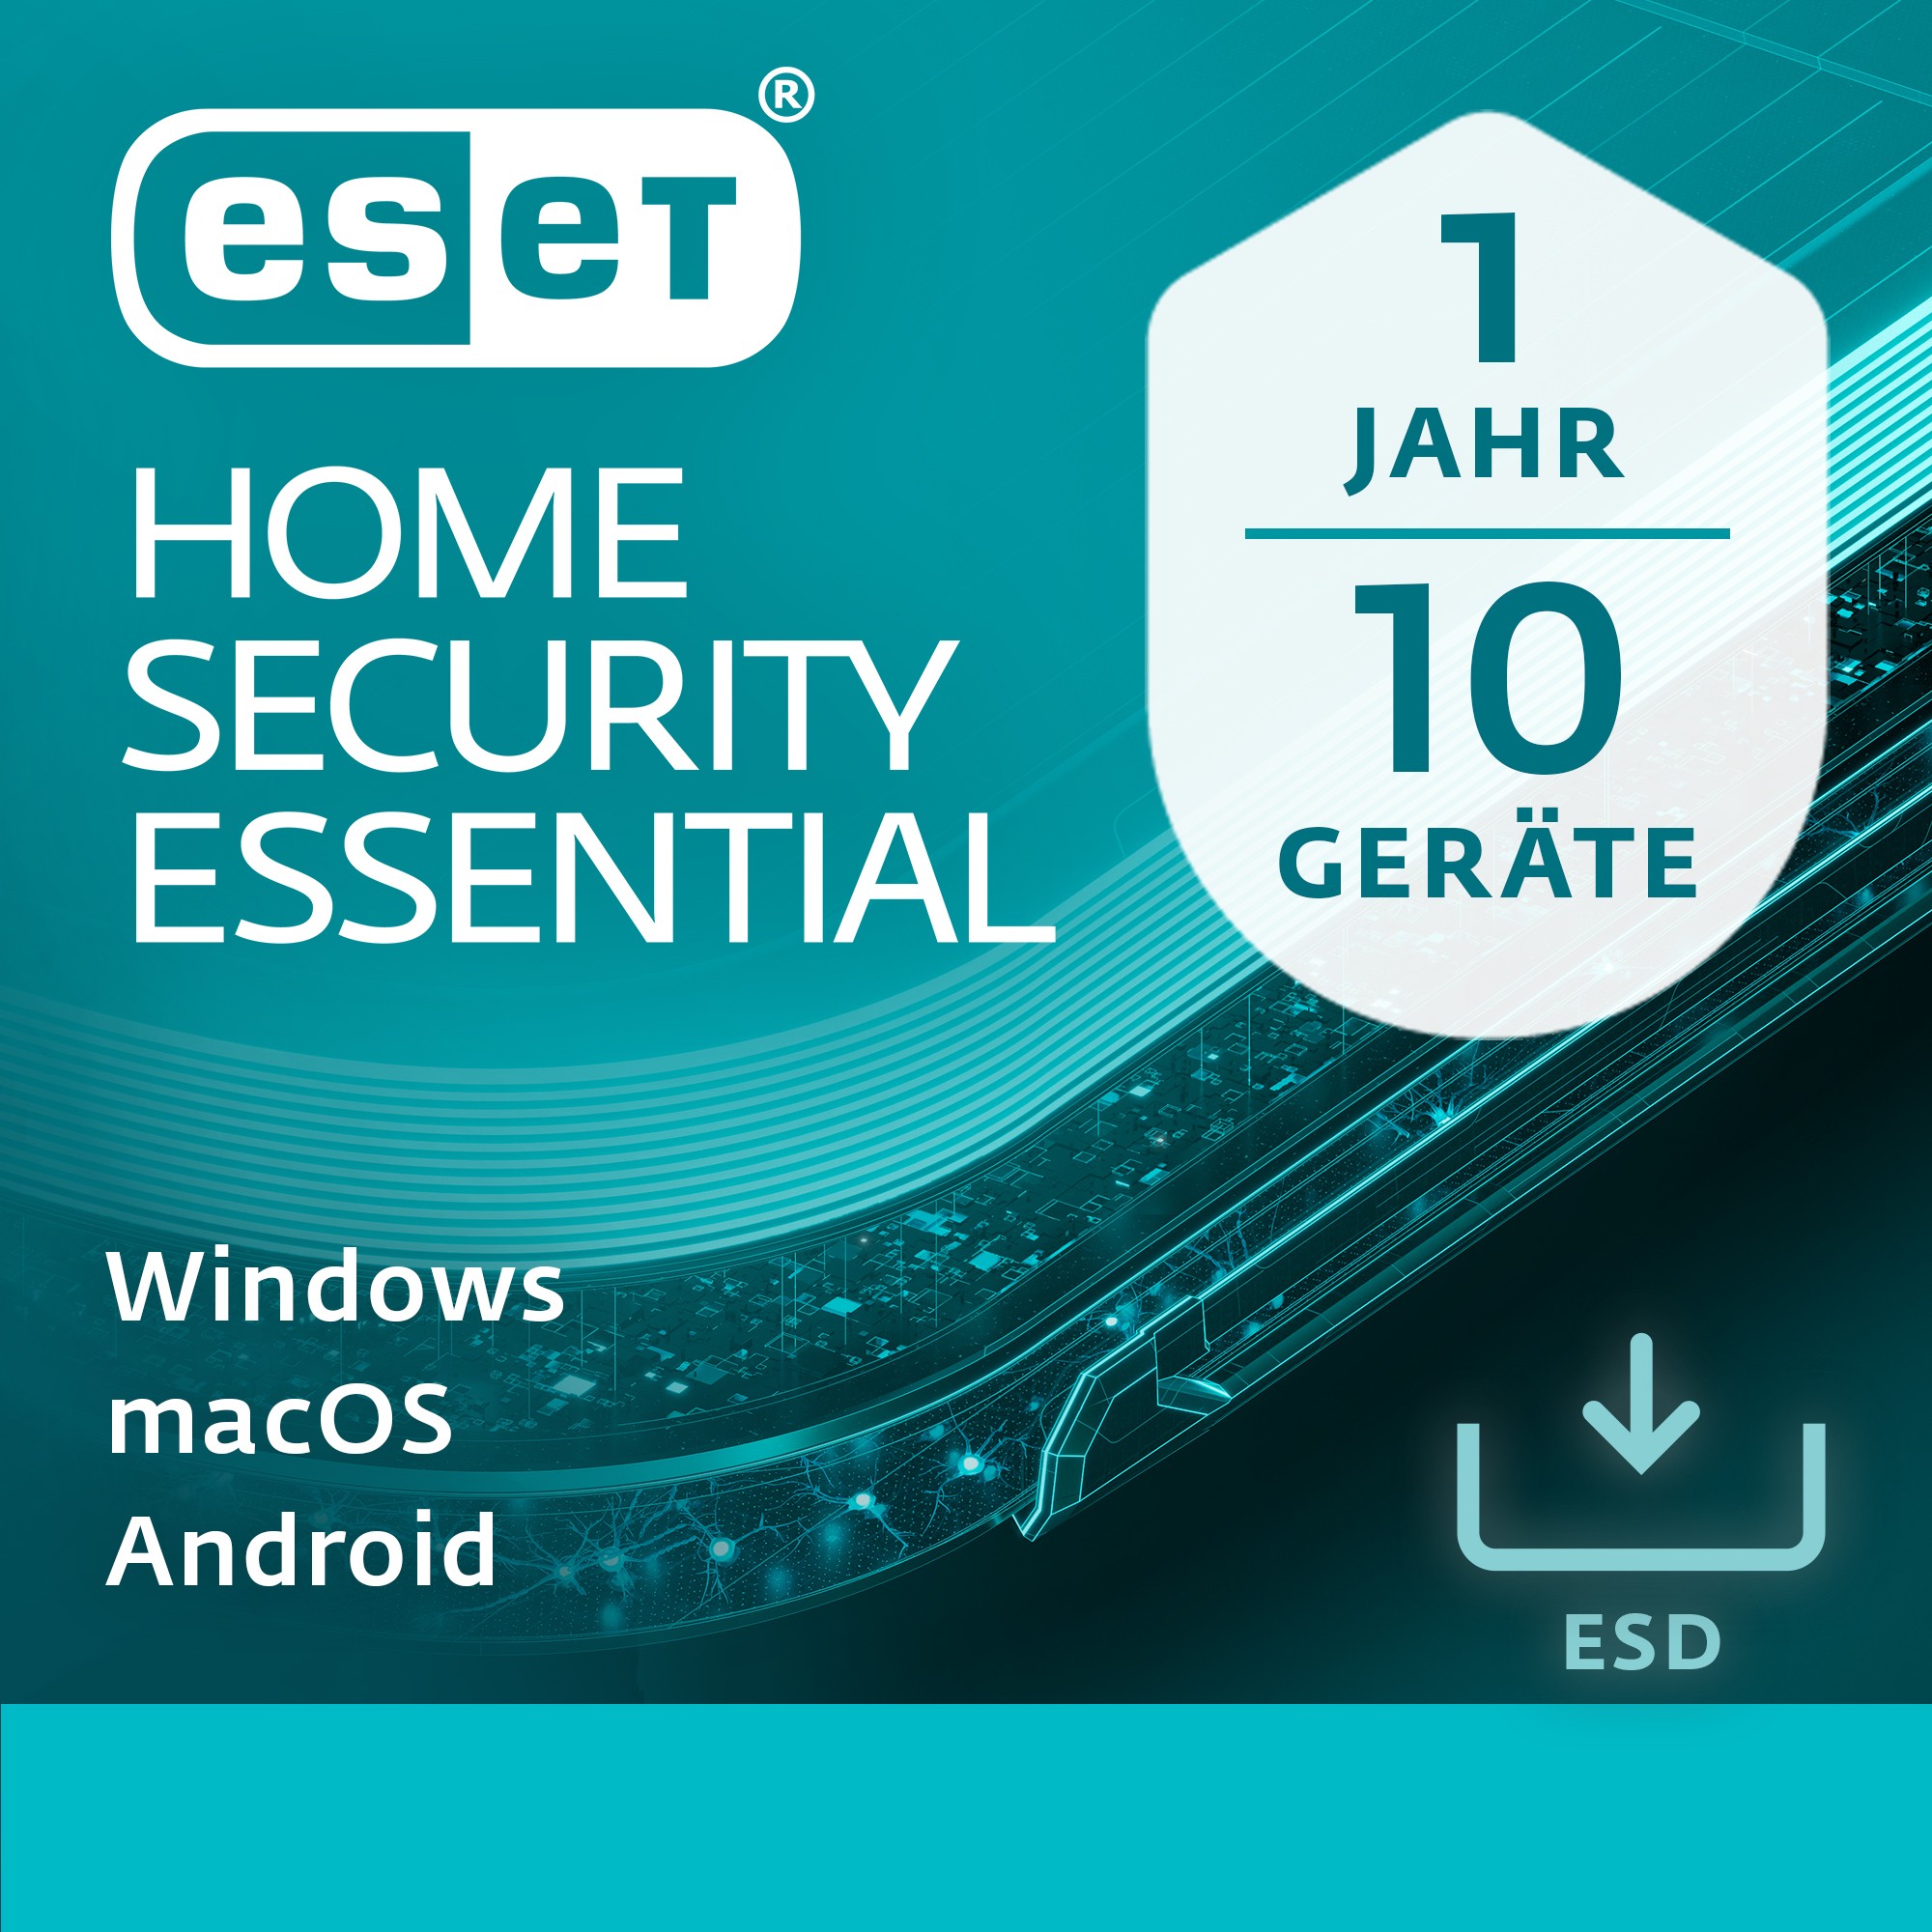 ESET Home Security Essential - 10 User. 1 Year - ESD-DownloadESD - EHSE-N1A10-VAKT-E